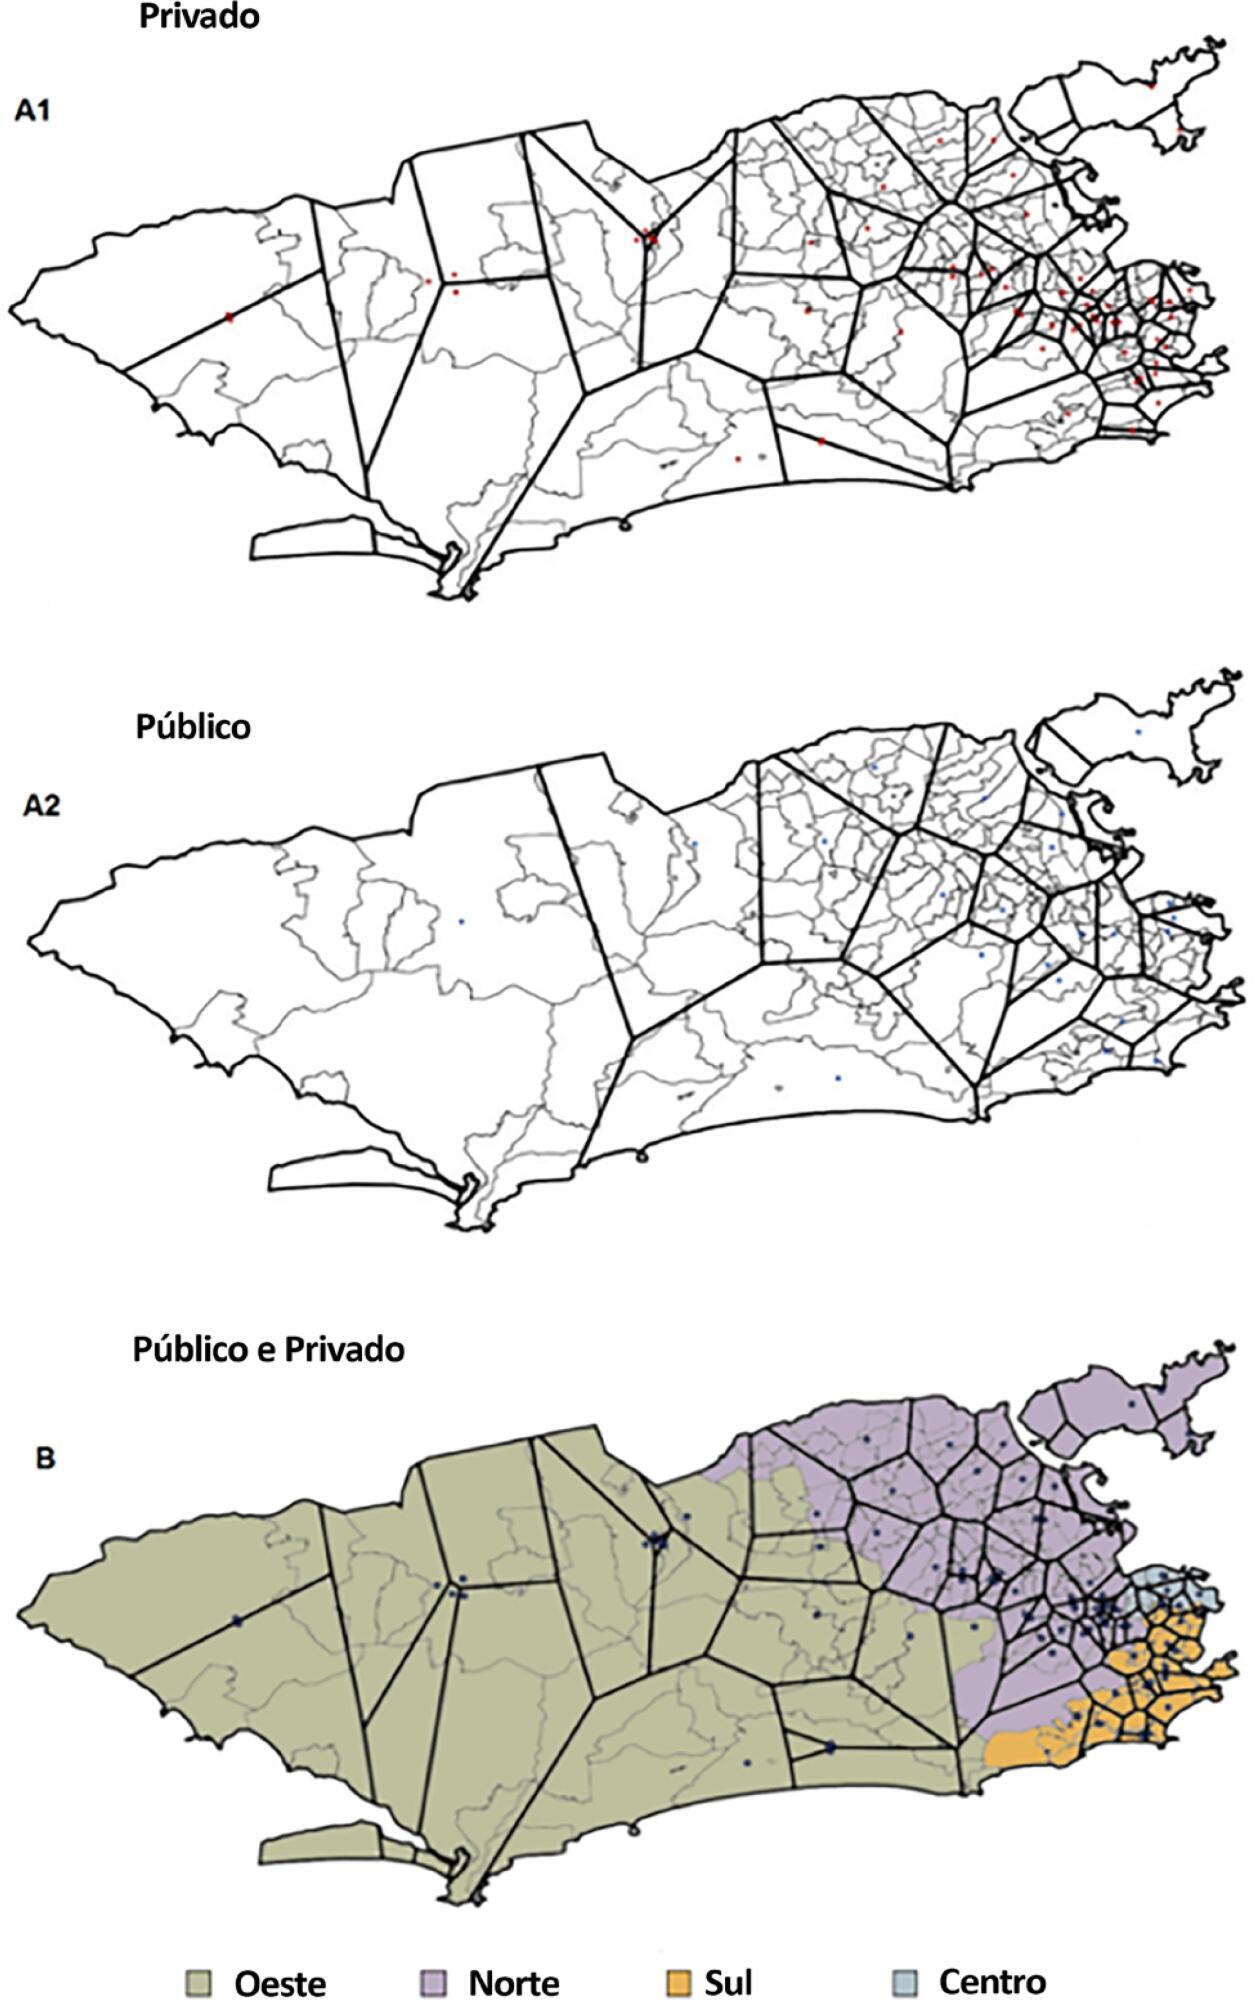 Intensive care inequity in Rio de Janeiro: the effect of spatial distribution of health services on severe acute respiratory infection